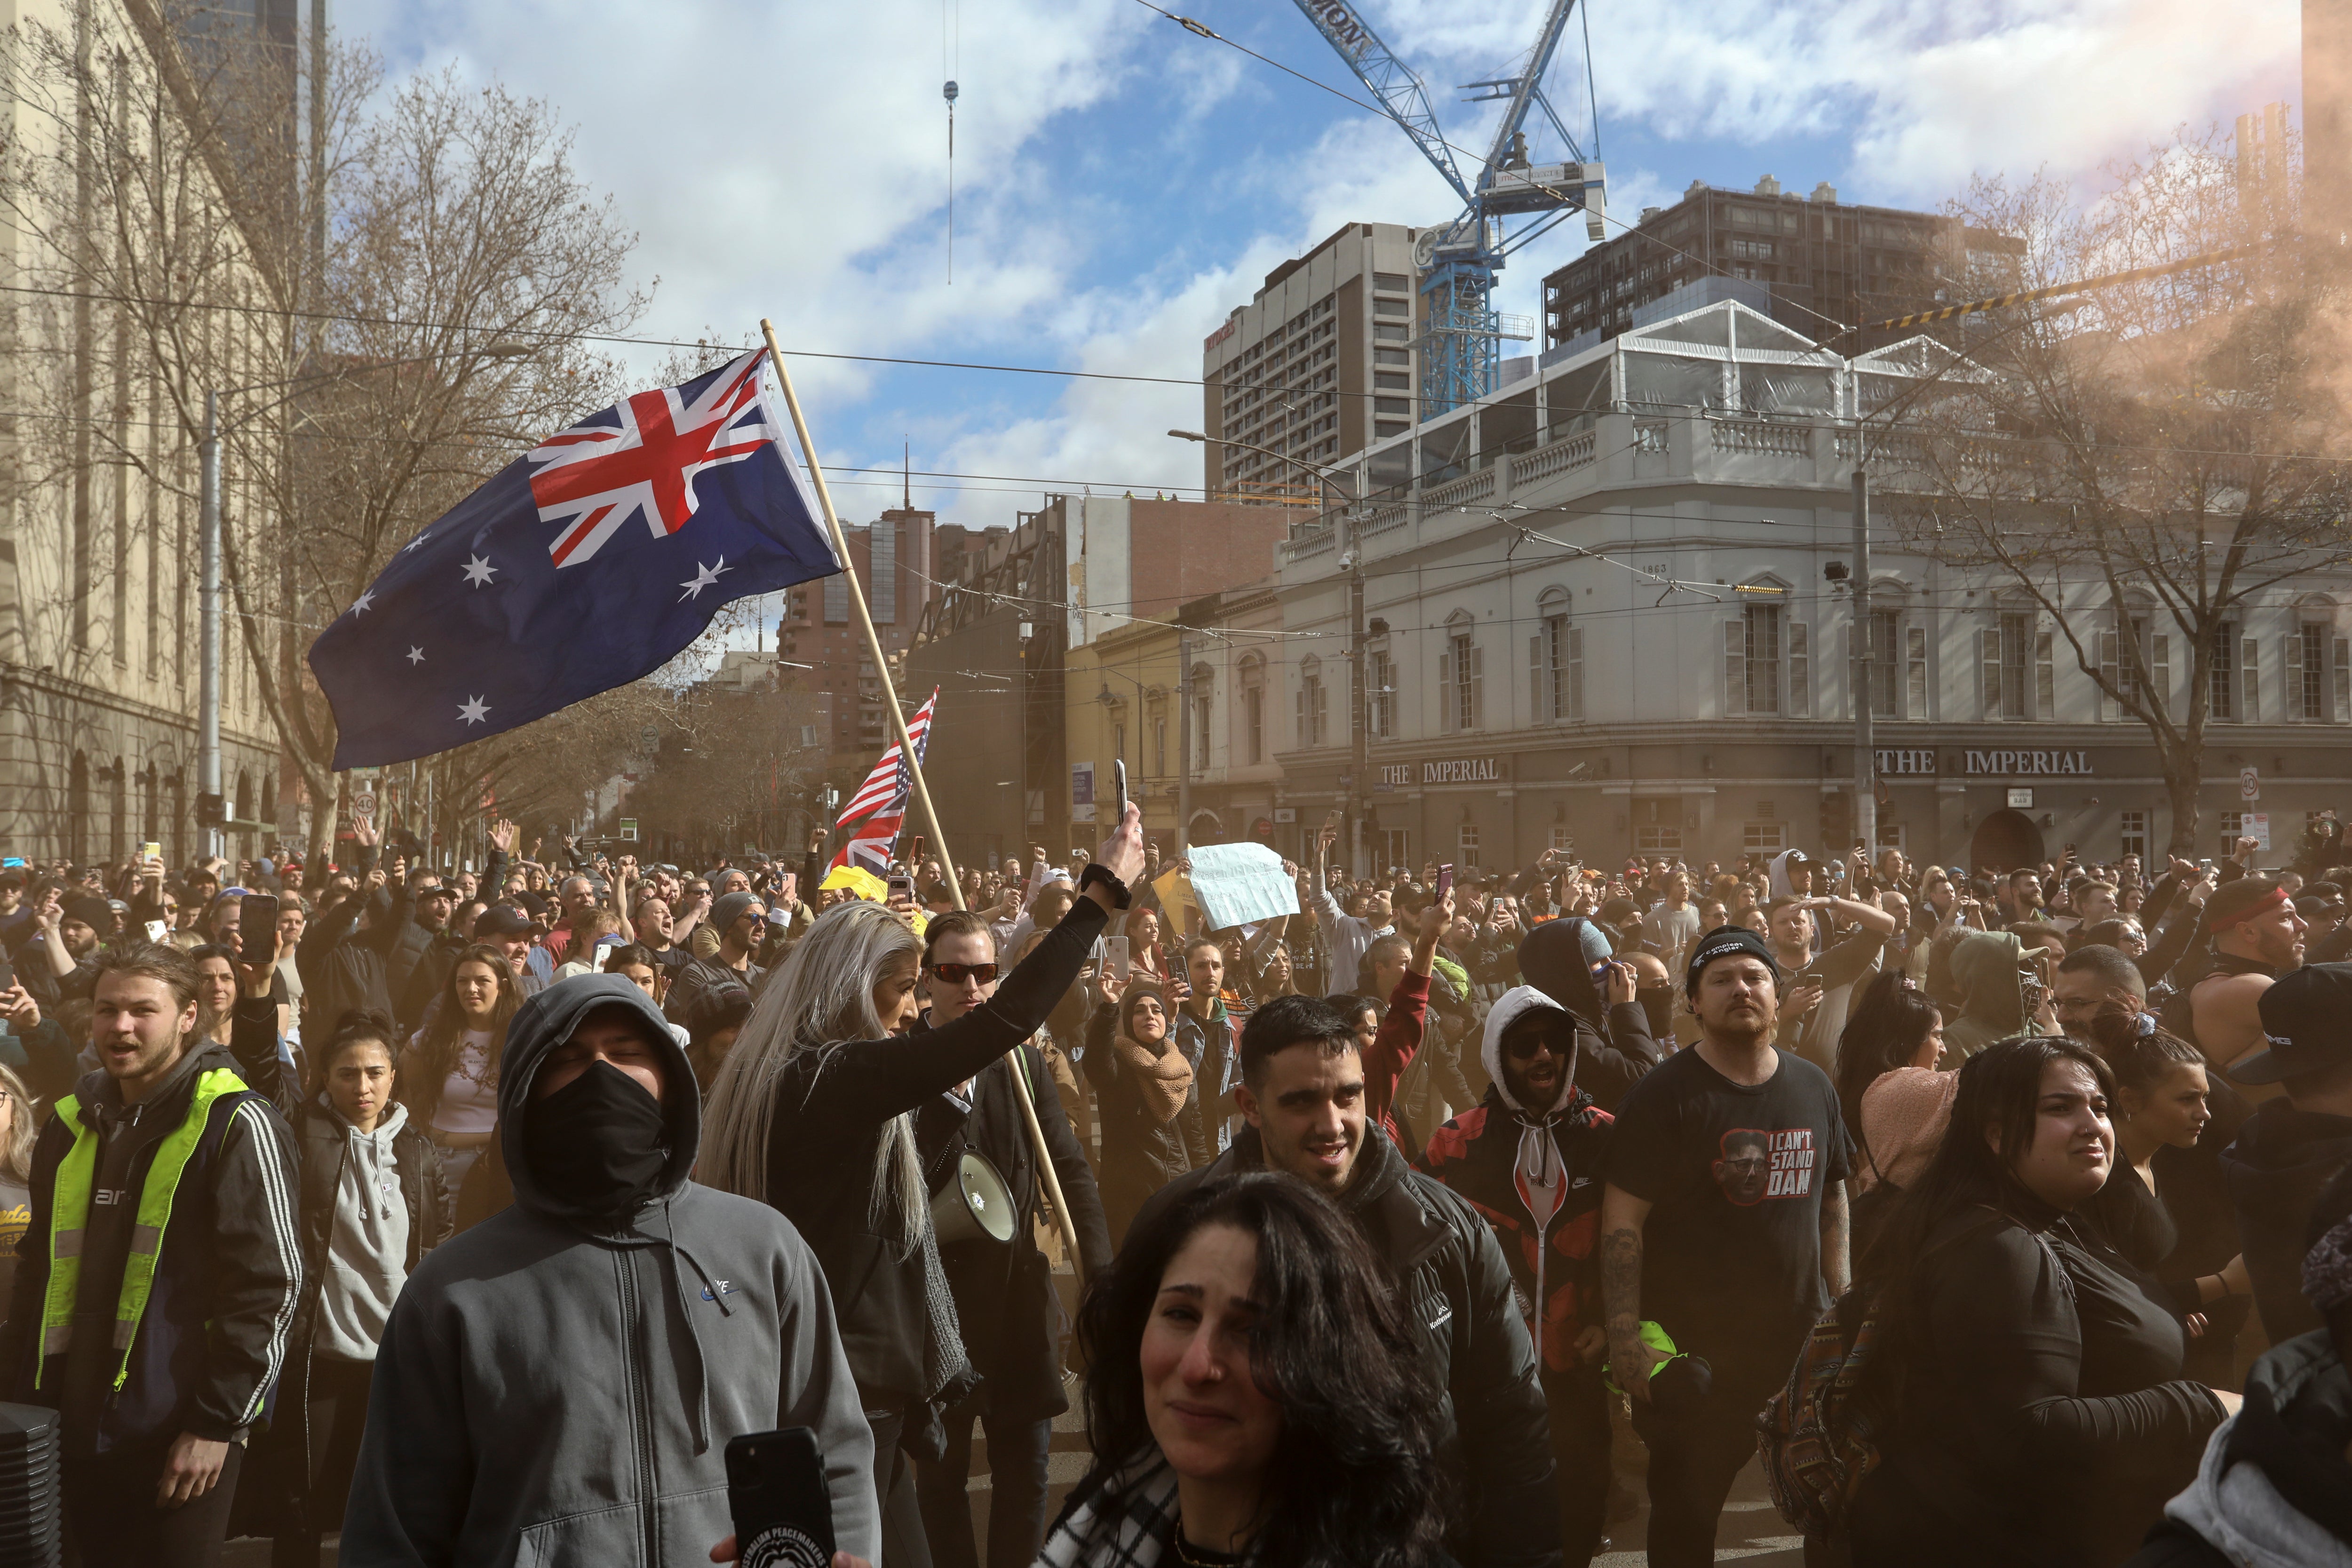 Thousands took part in the protest in Sydney